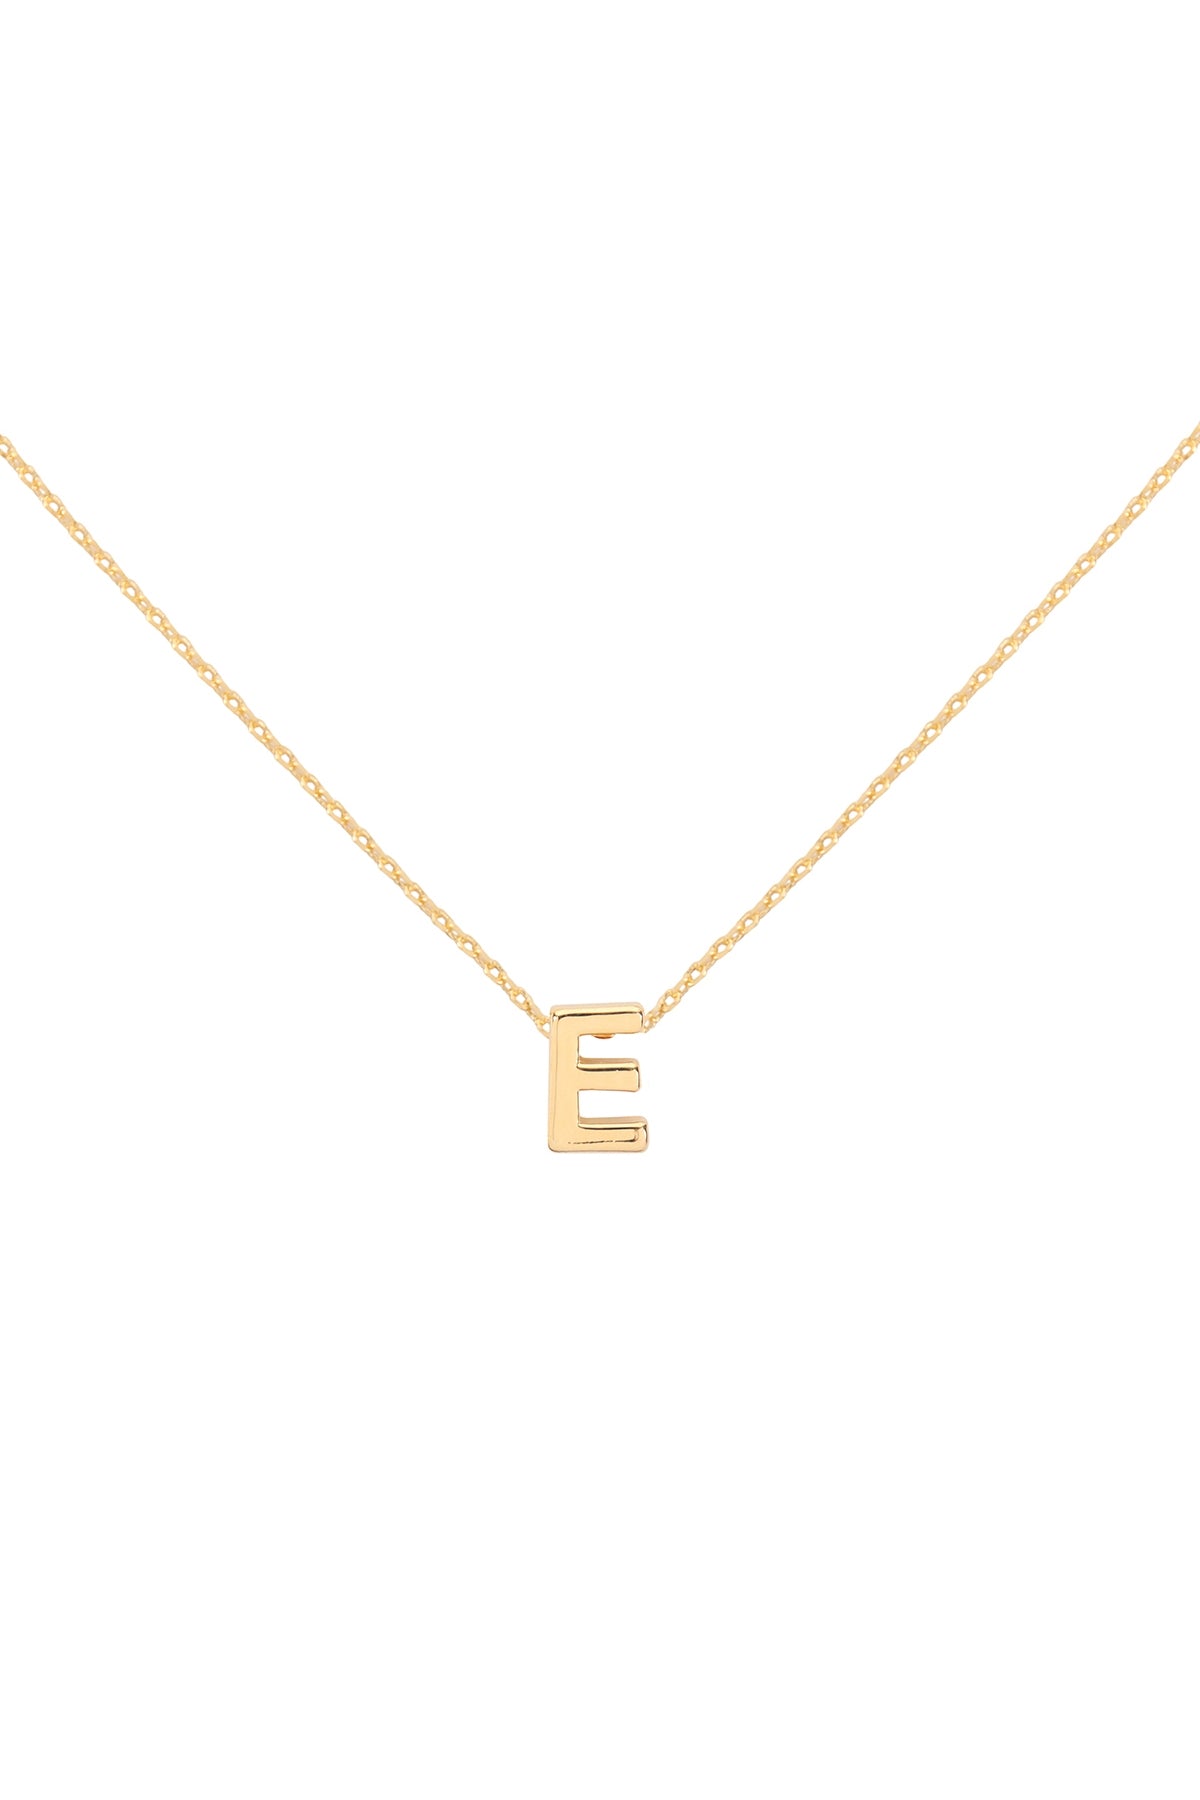 "E" INITIAL DAINTY CHARM NECKLACE